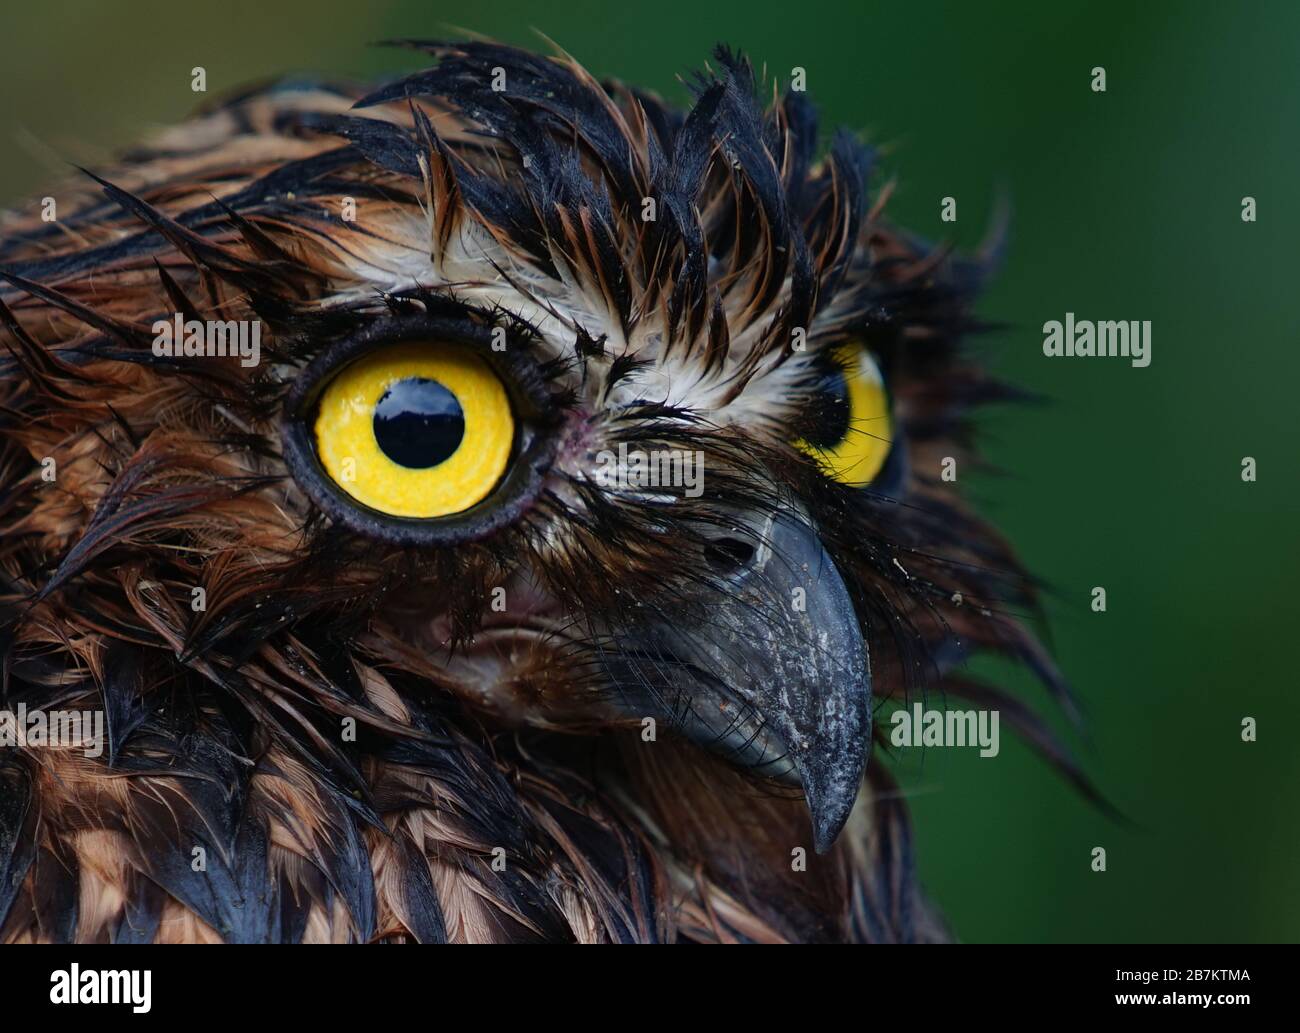 A Sumatran owl falls from a tree and enters a fish pond in Palembang on Tuesday, March 17, 2020. (Photo by Sigit Prasetya) Stock Photo